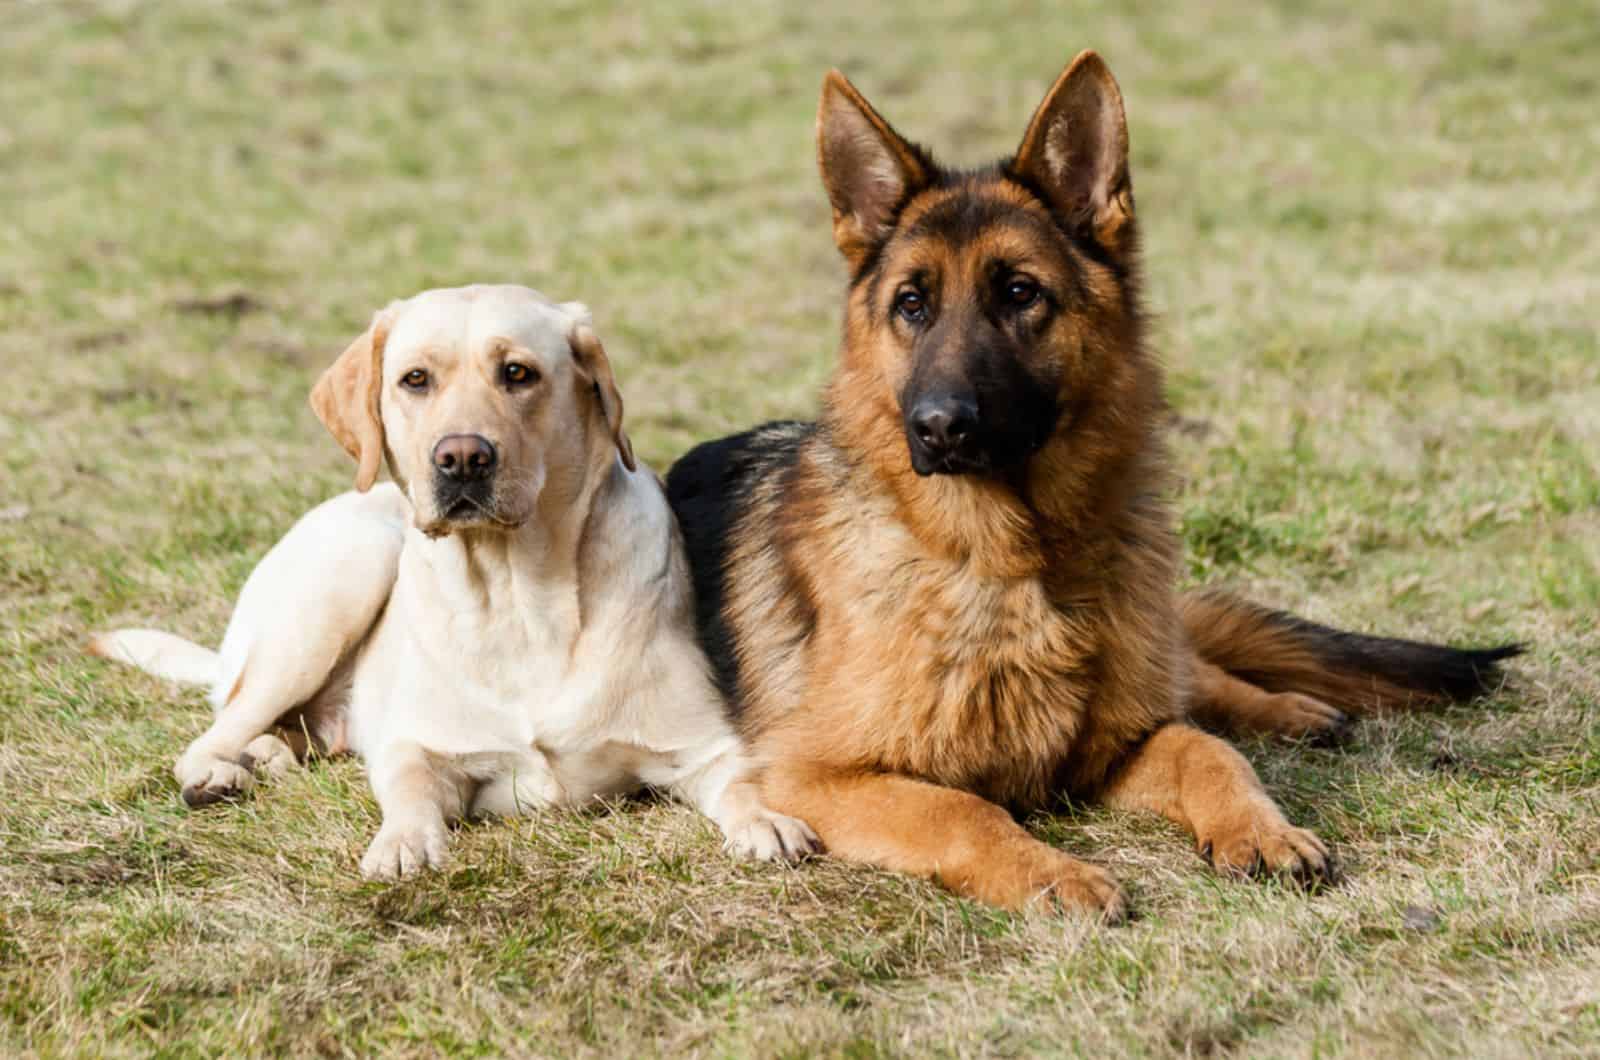 German Shepherd Vs Labrador – How Different Are They?